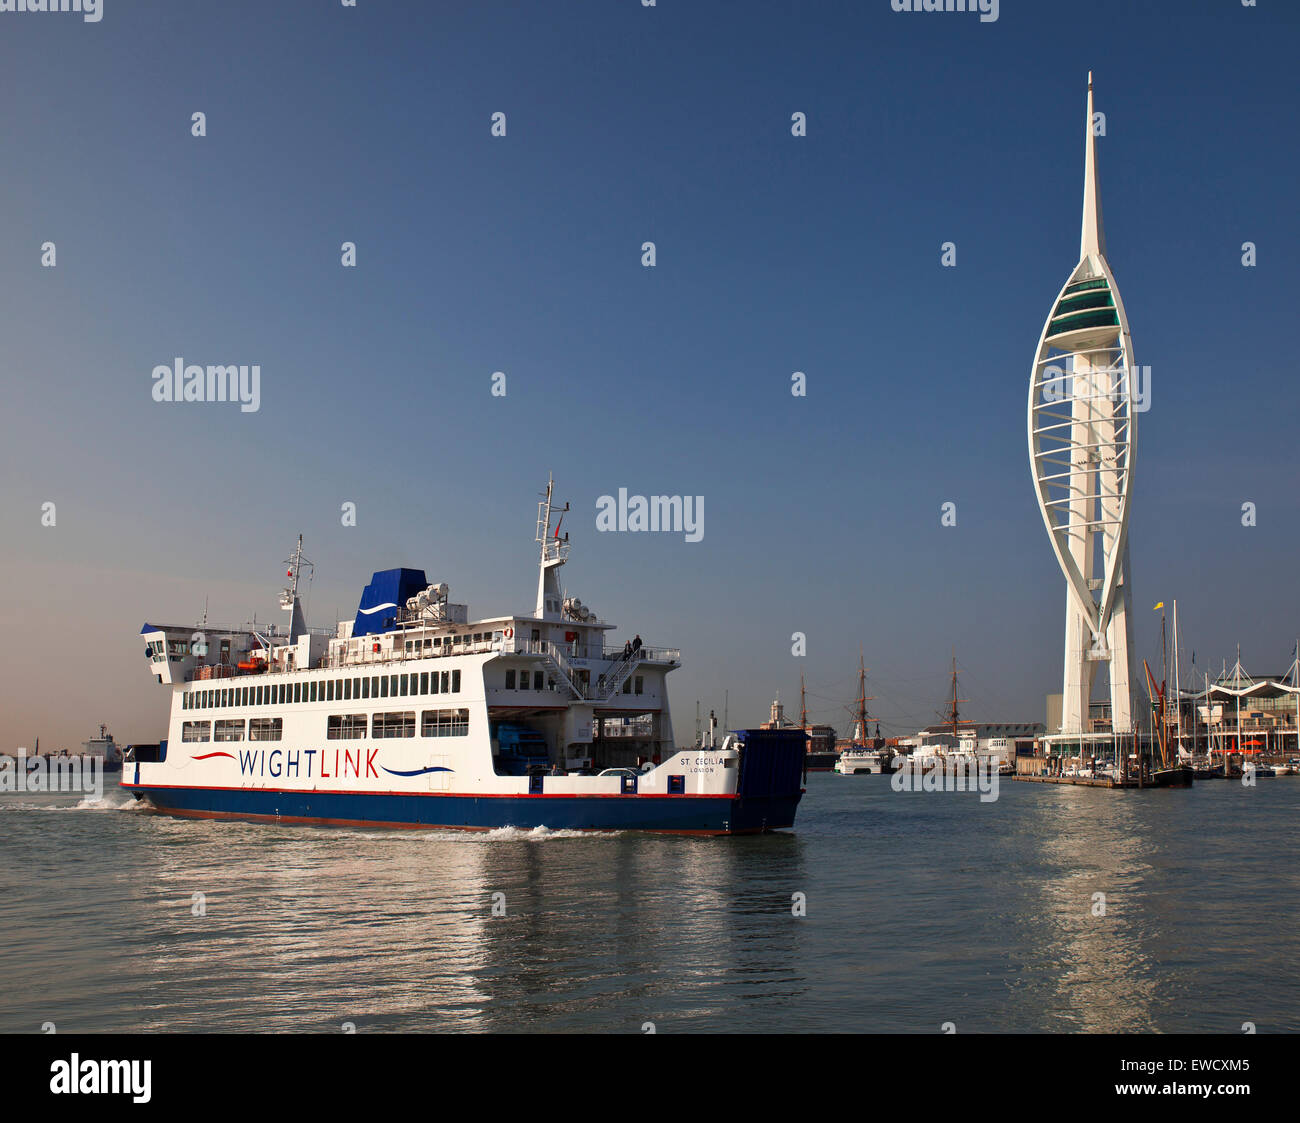 Wightlink Isle of Wight ferry arriving at Portsmouth. Stock Photo